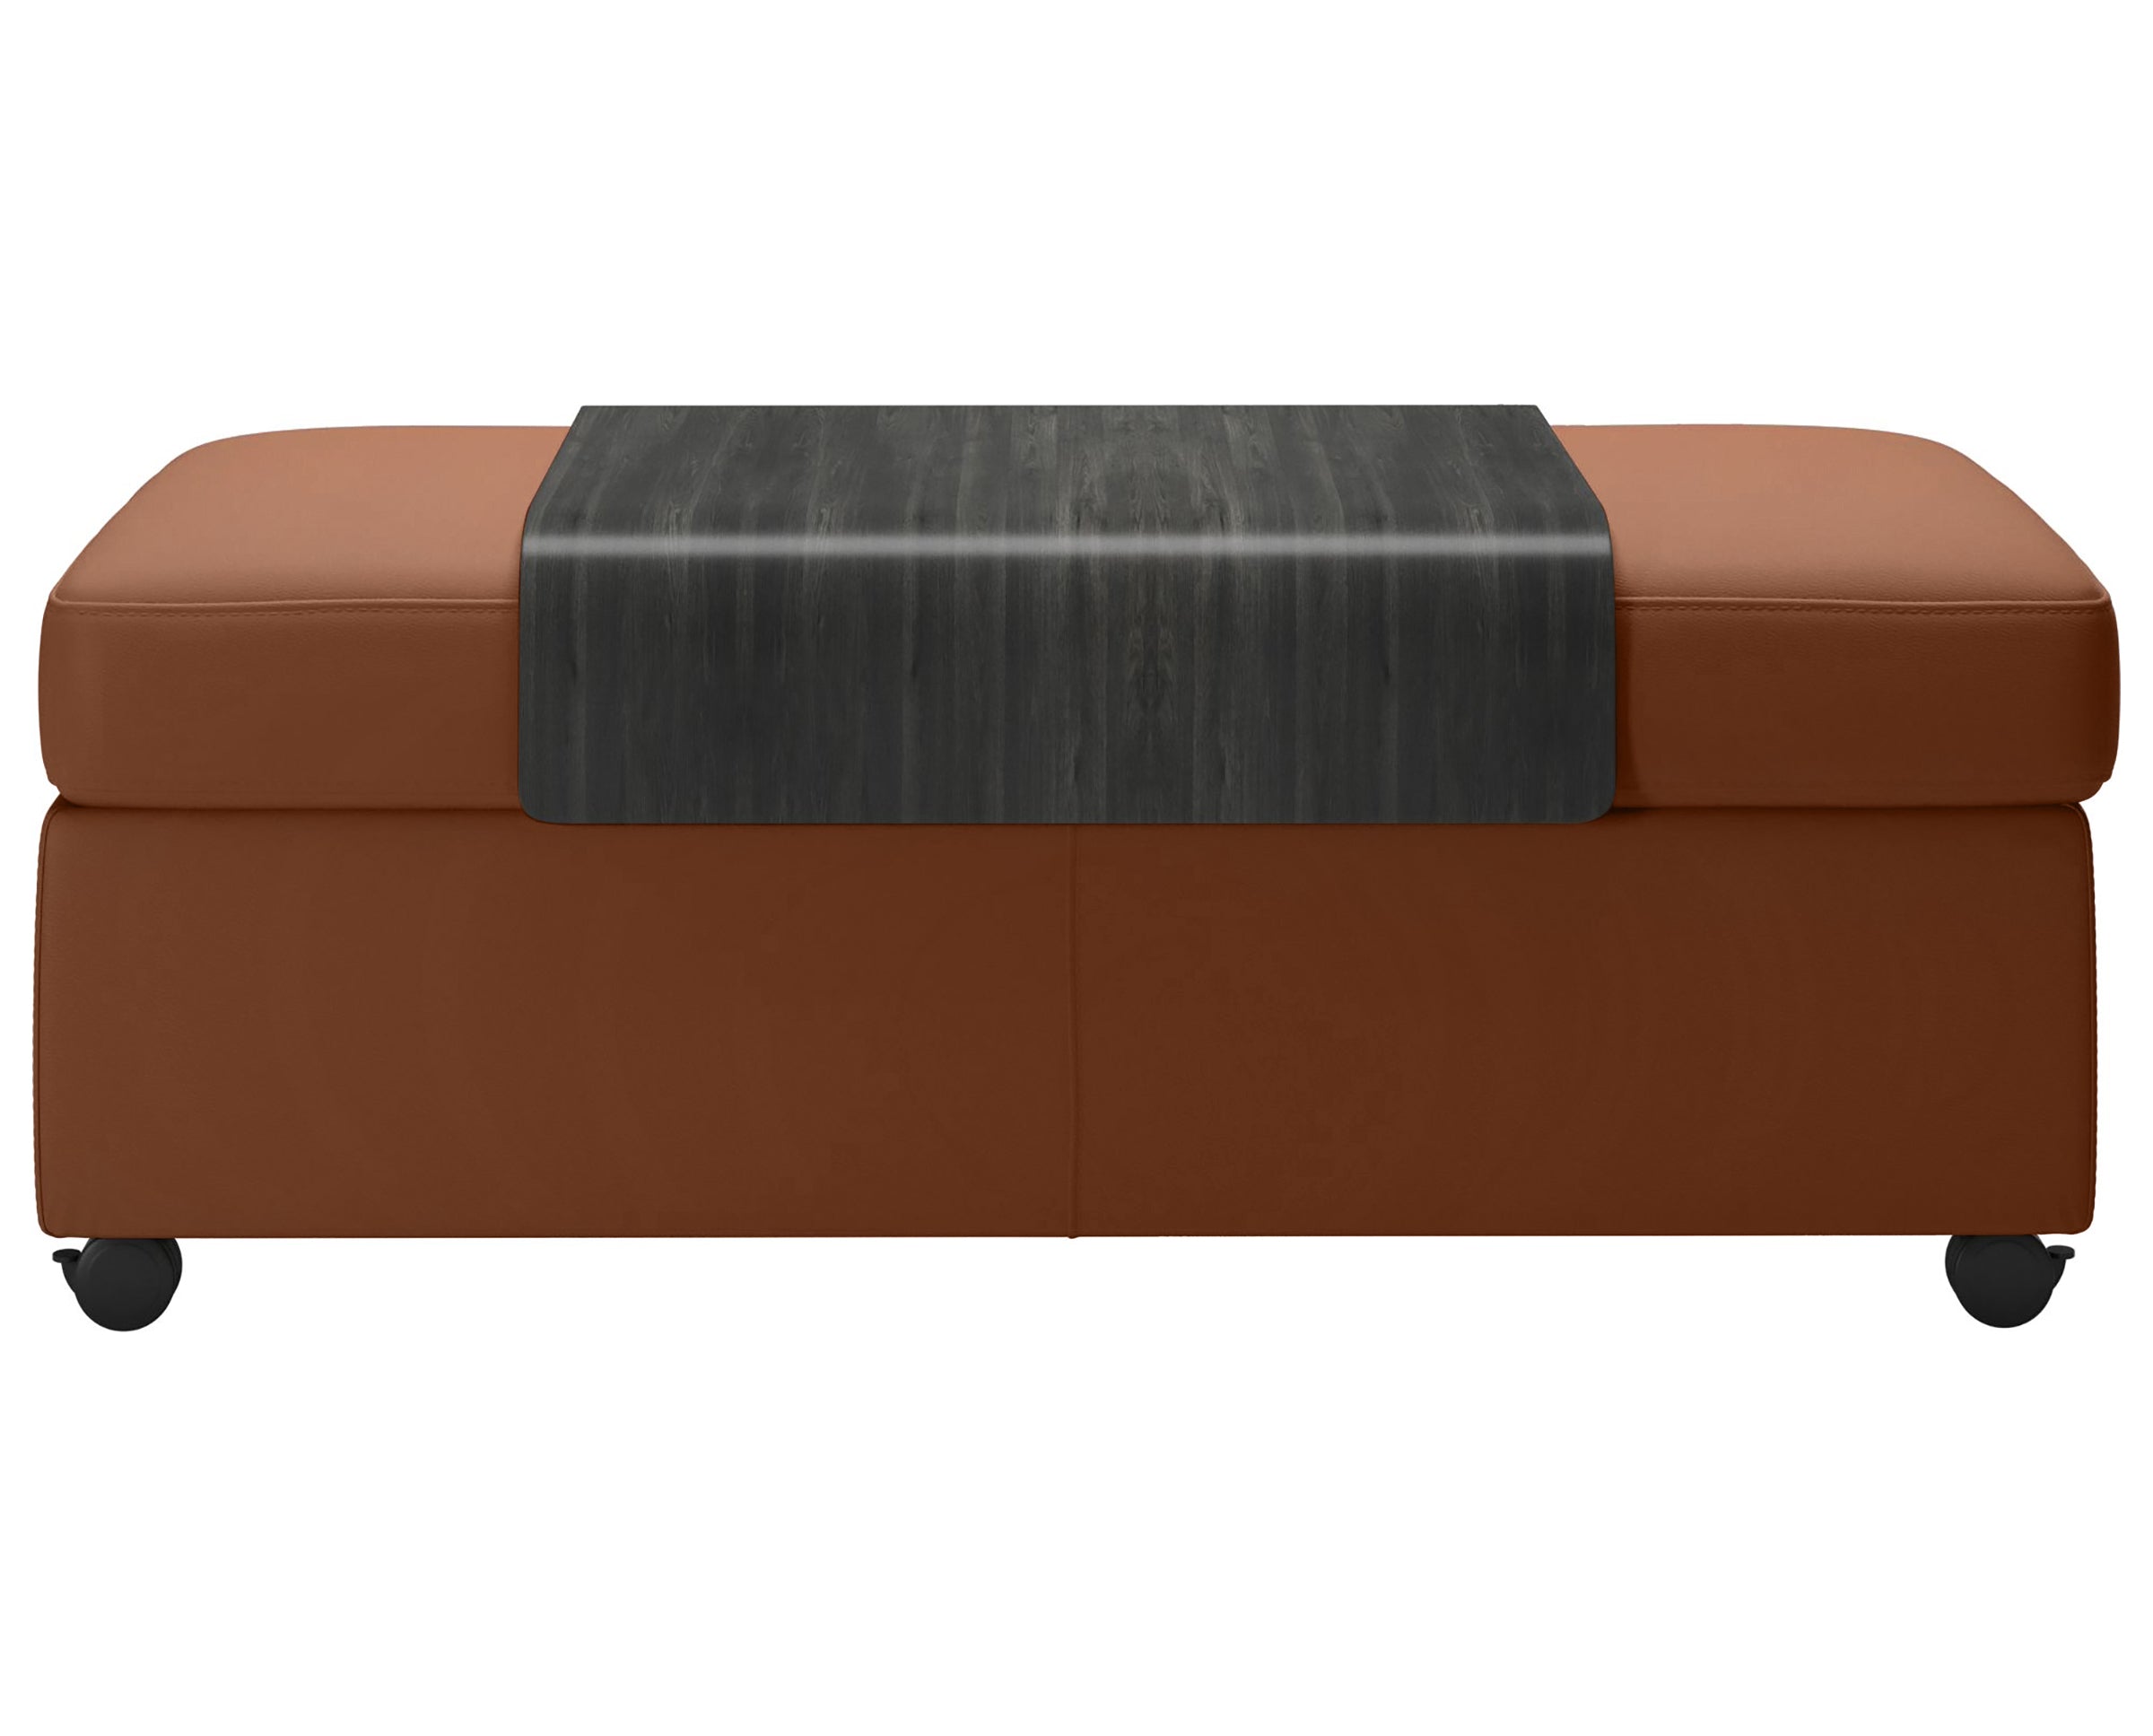 Paloma Leather New Cognac and Grey Finish | Stressless Double Ottoman with Table | Valley Ridge Furniture